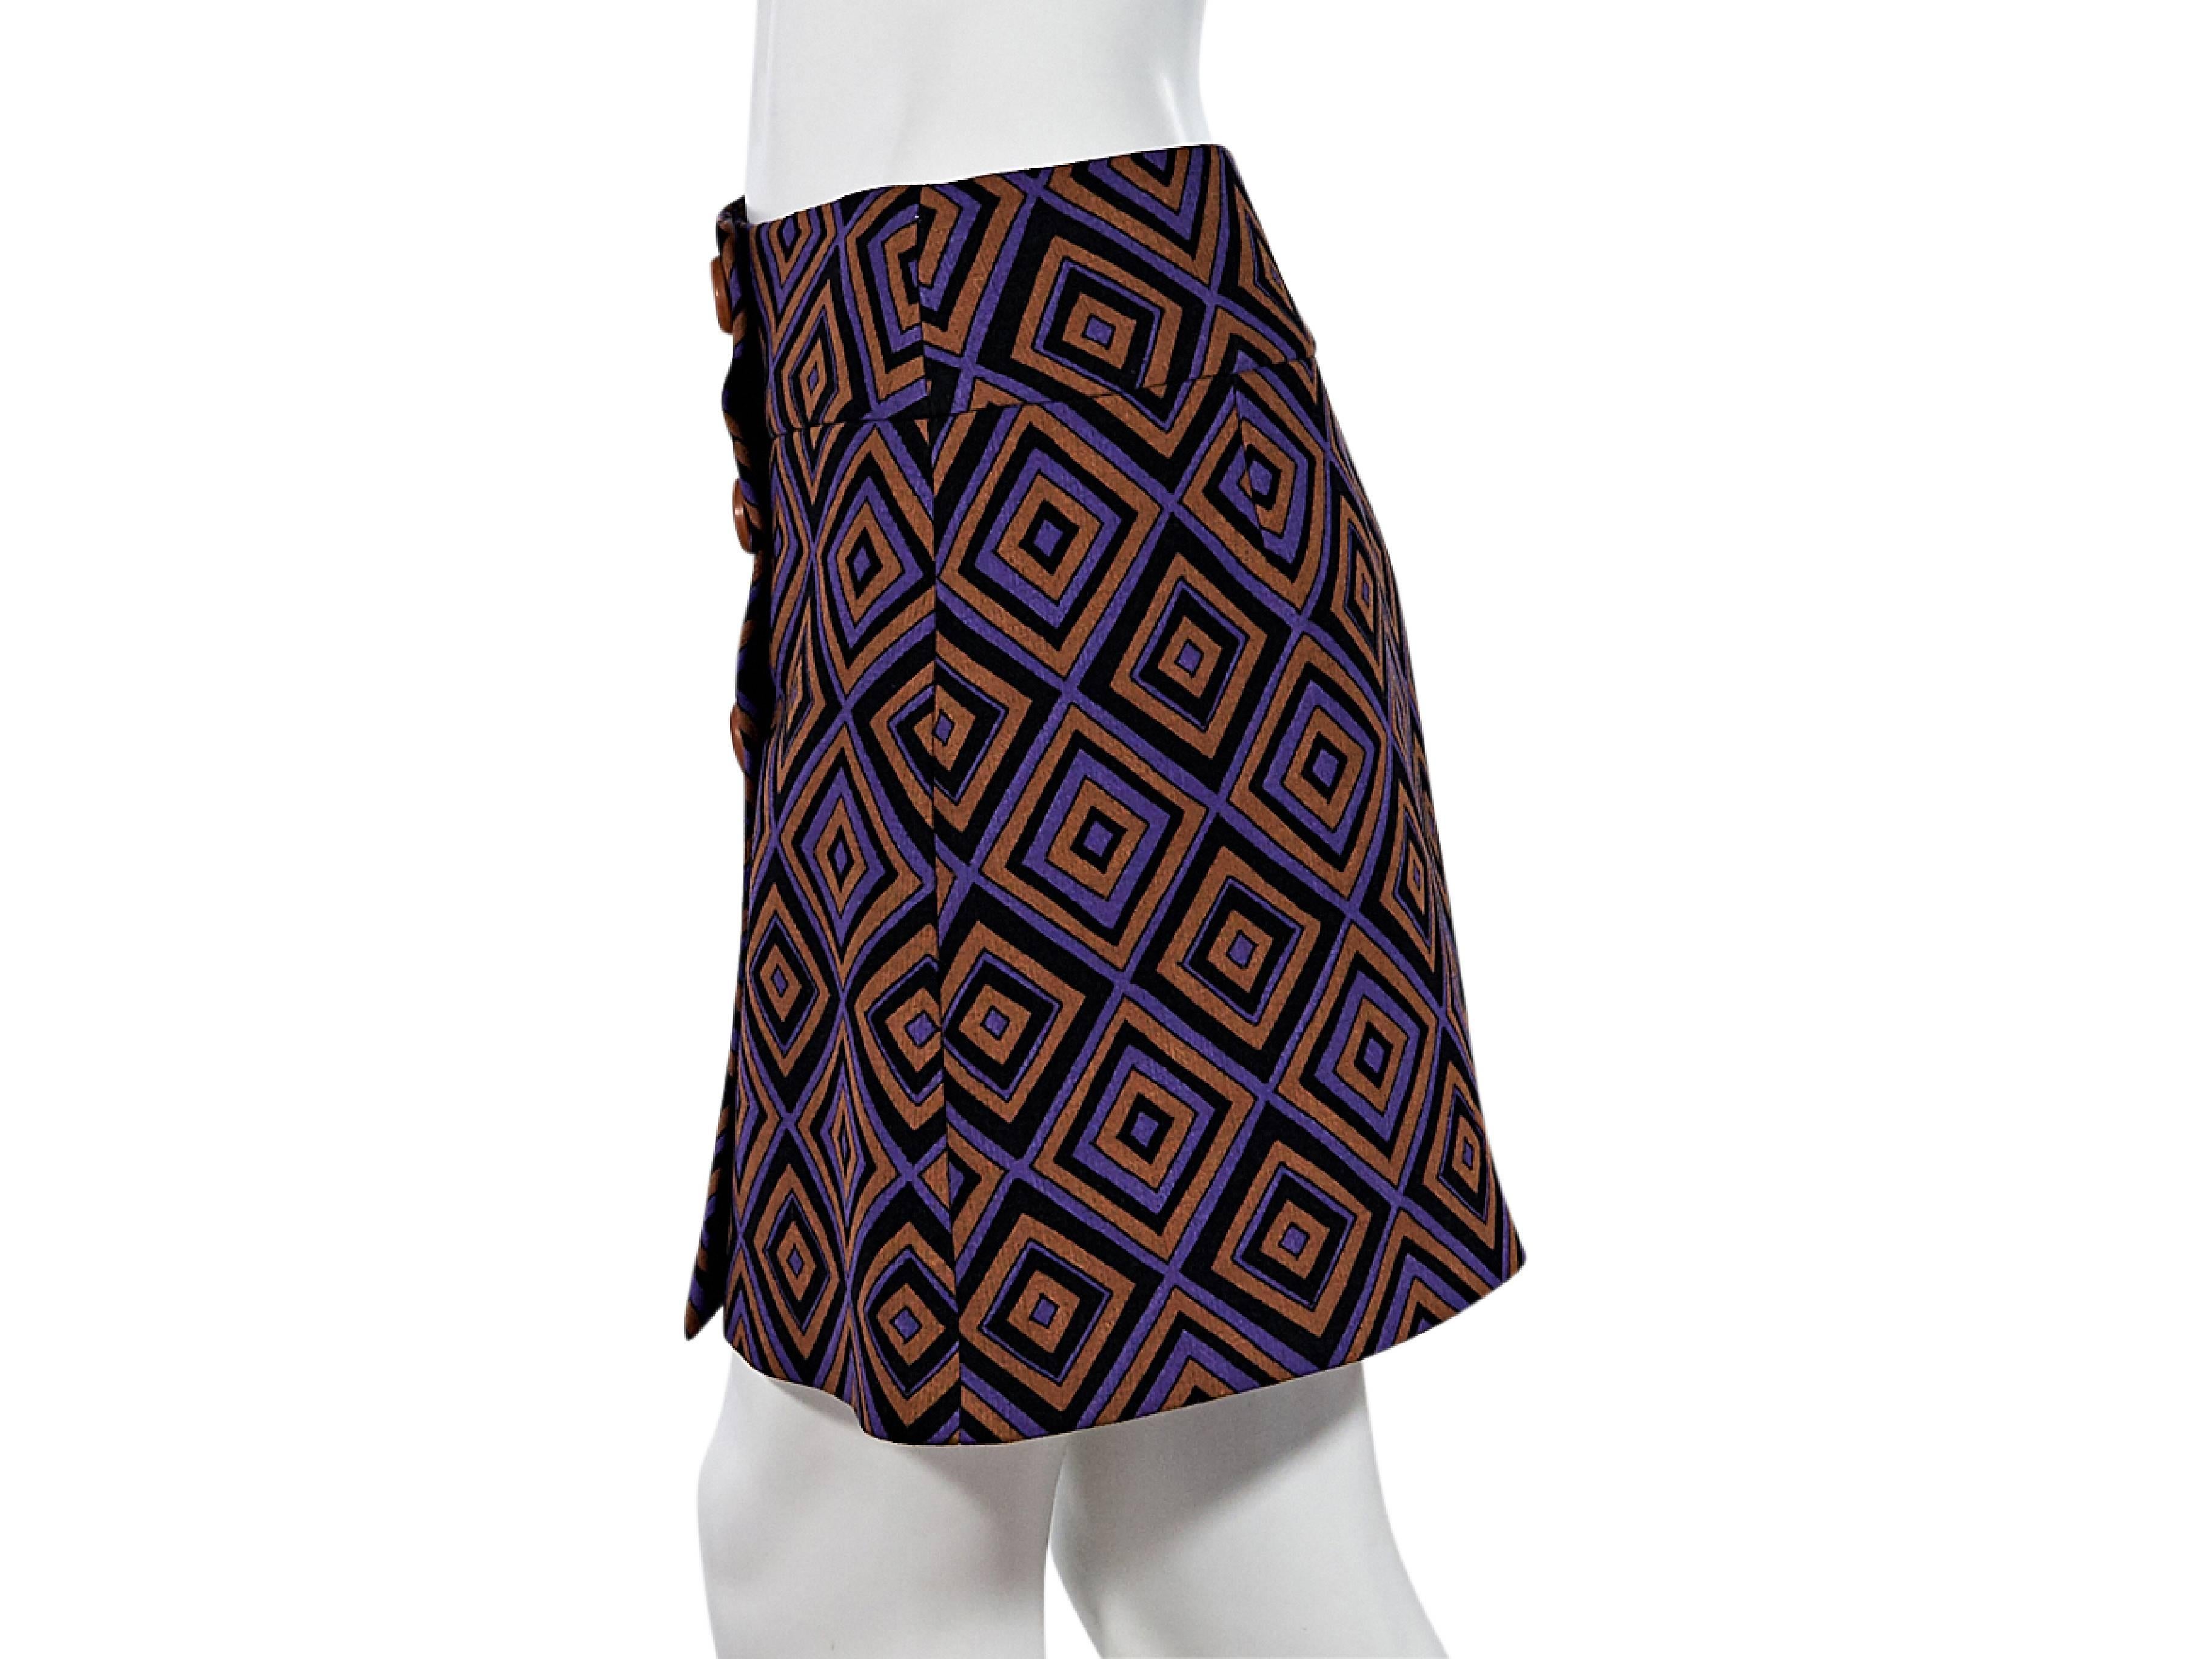 Product details:  Multicolor abstract-printed virgin wool mini skirt by Prada.  Wide banded waist.  Button-front closure.  Size 2
Condition: Pre-owned. Very good.

Est. Retail $ 598.00